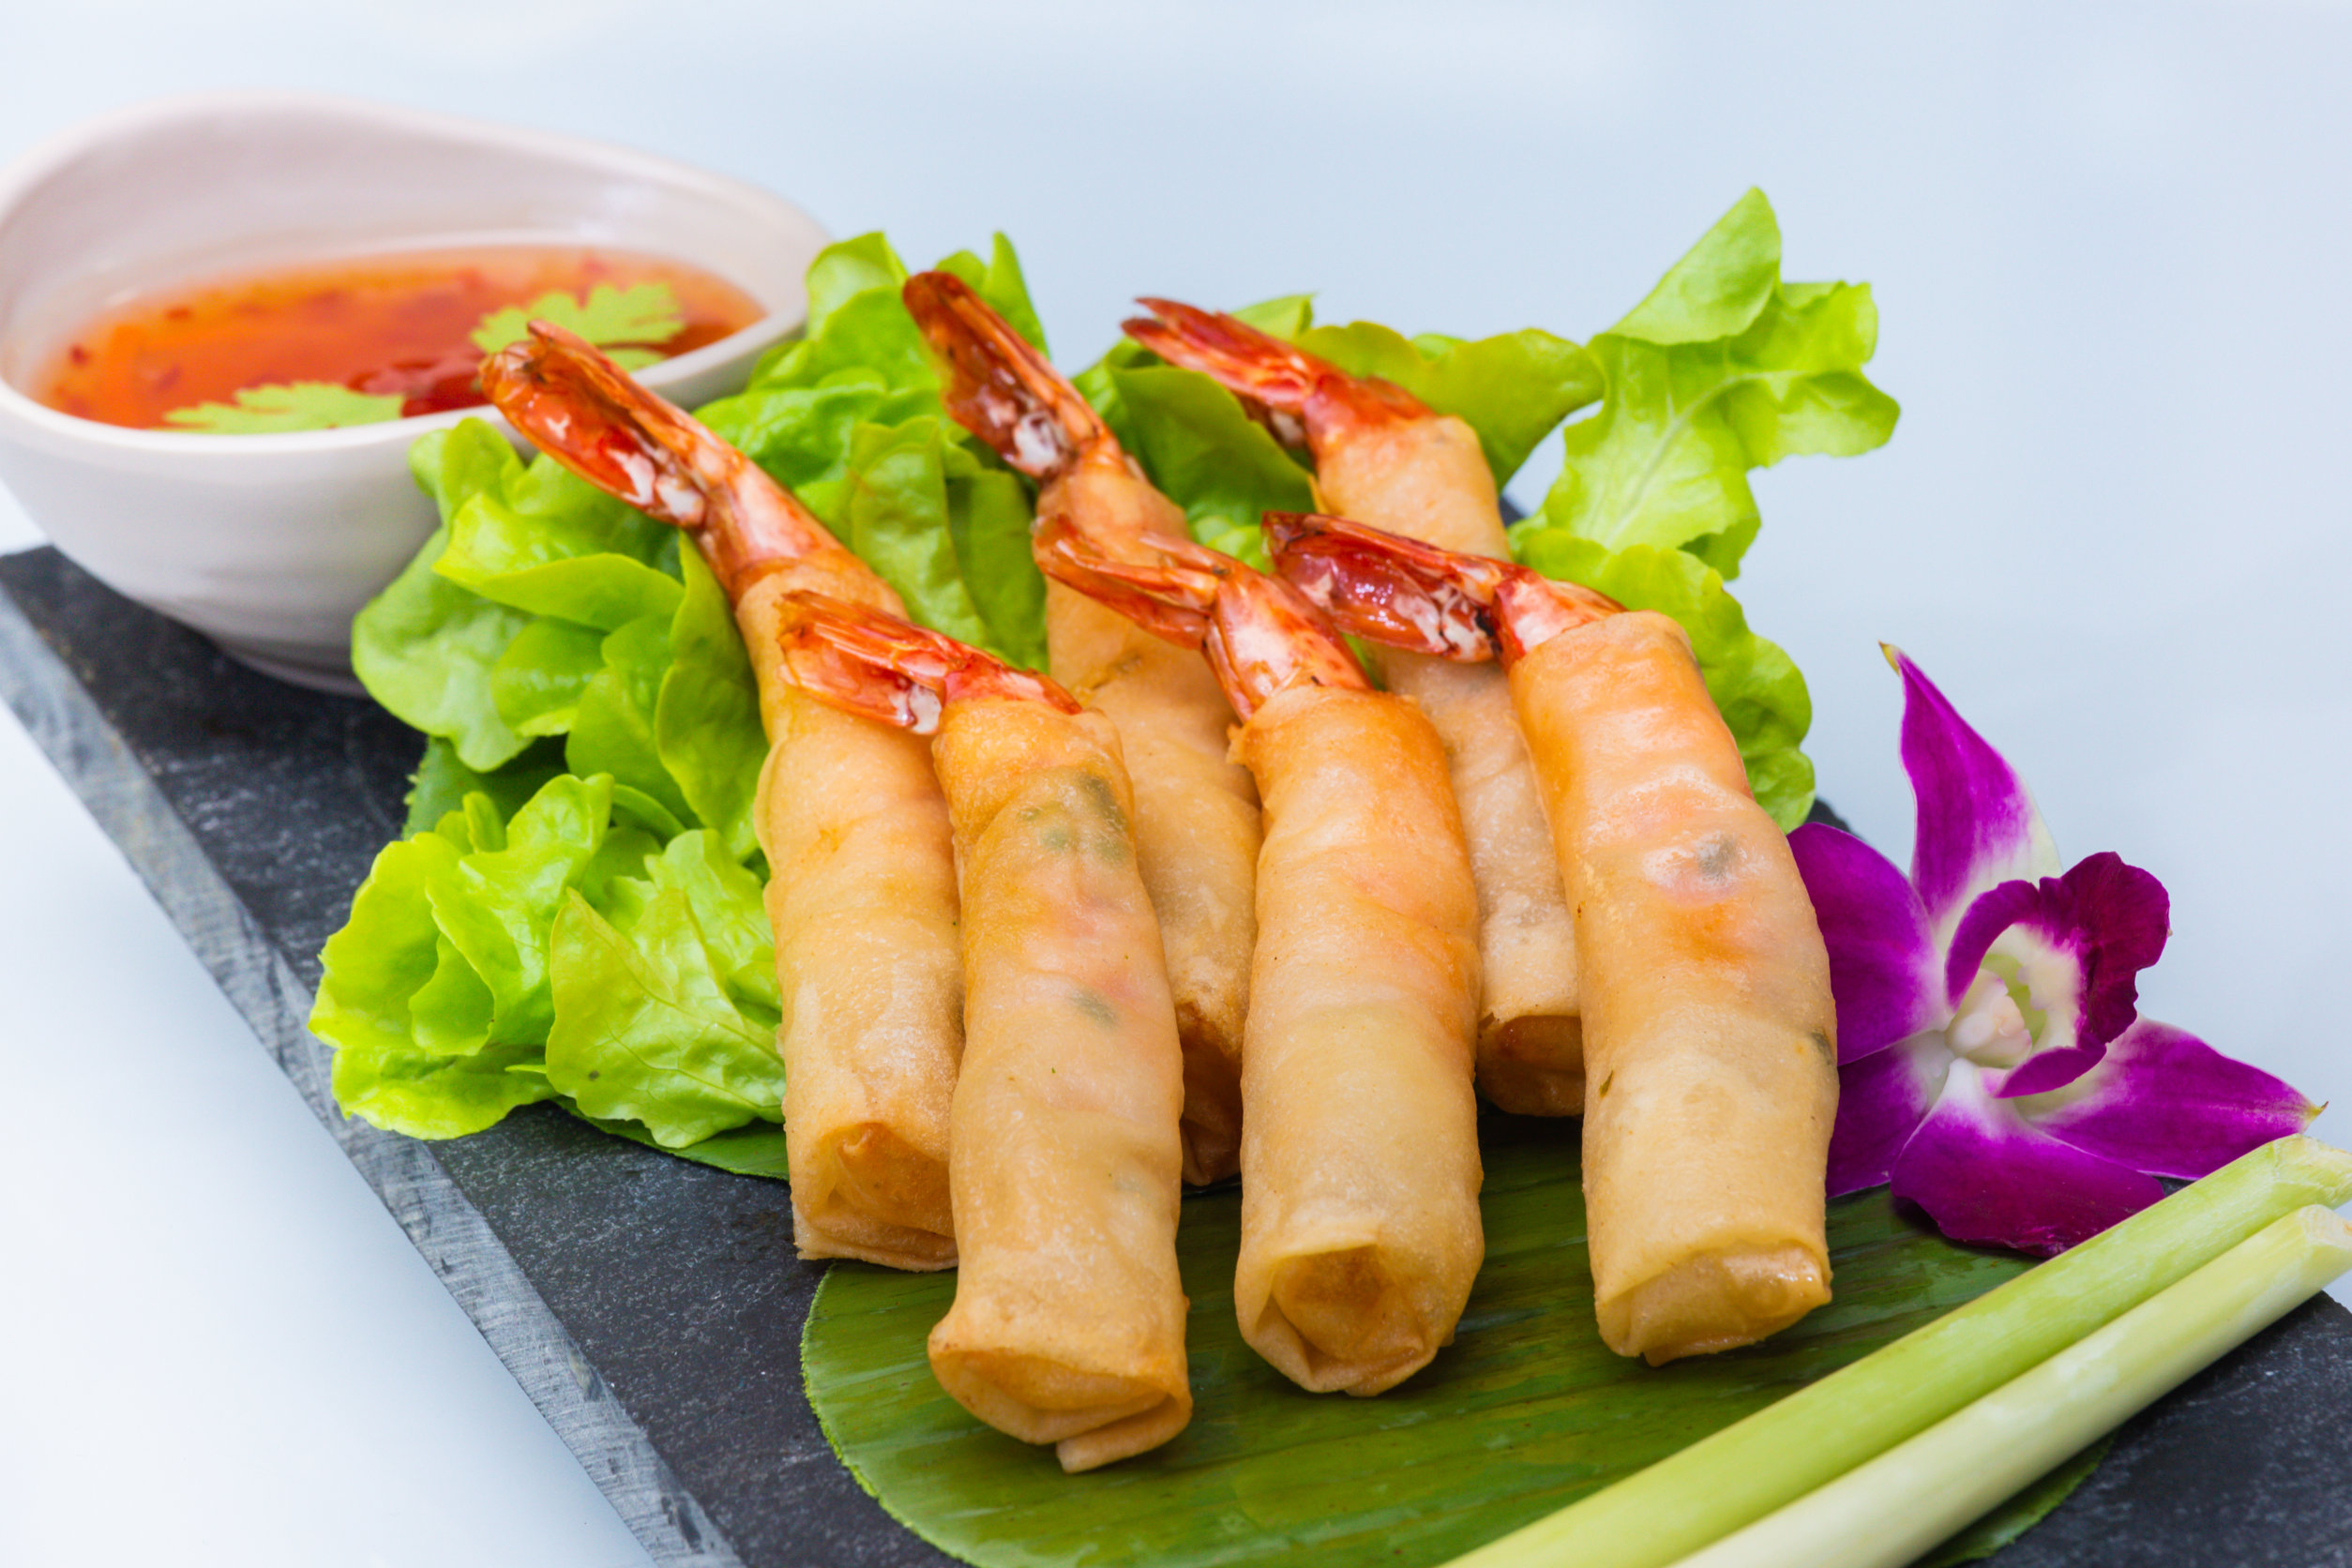 Egg roll skin wrapped shrimp 4 3 2022 | Wrap It Up by John Peppin, D.O.